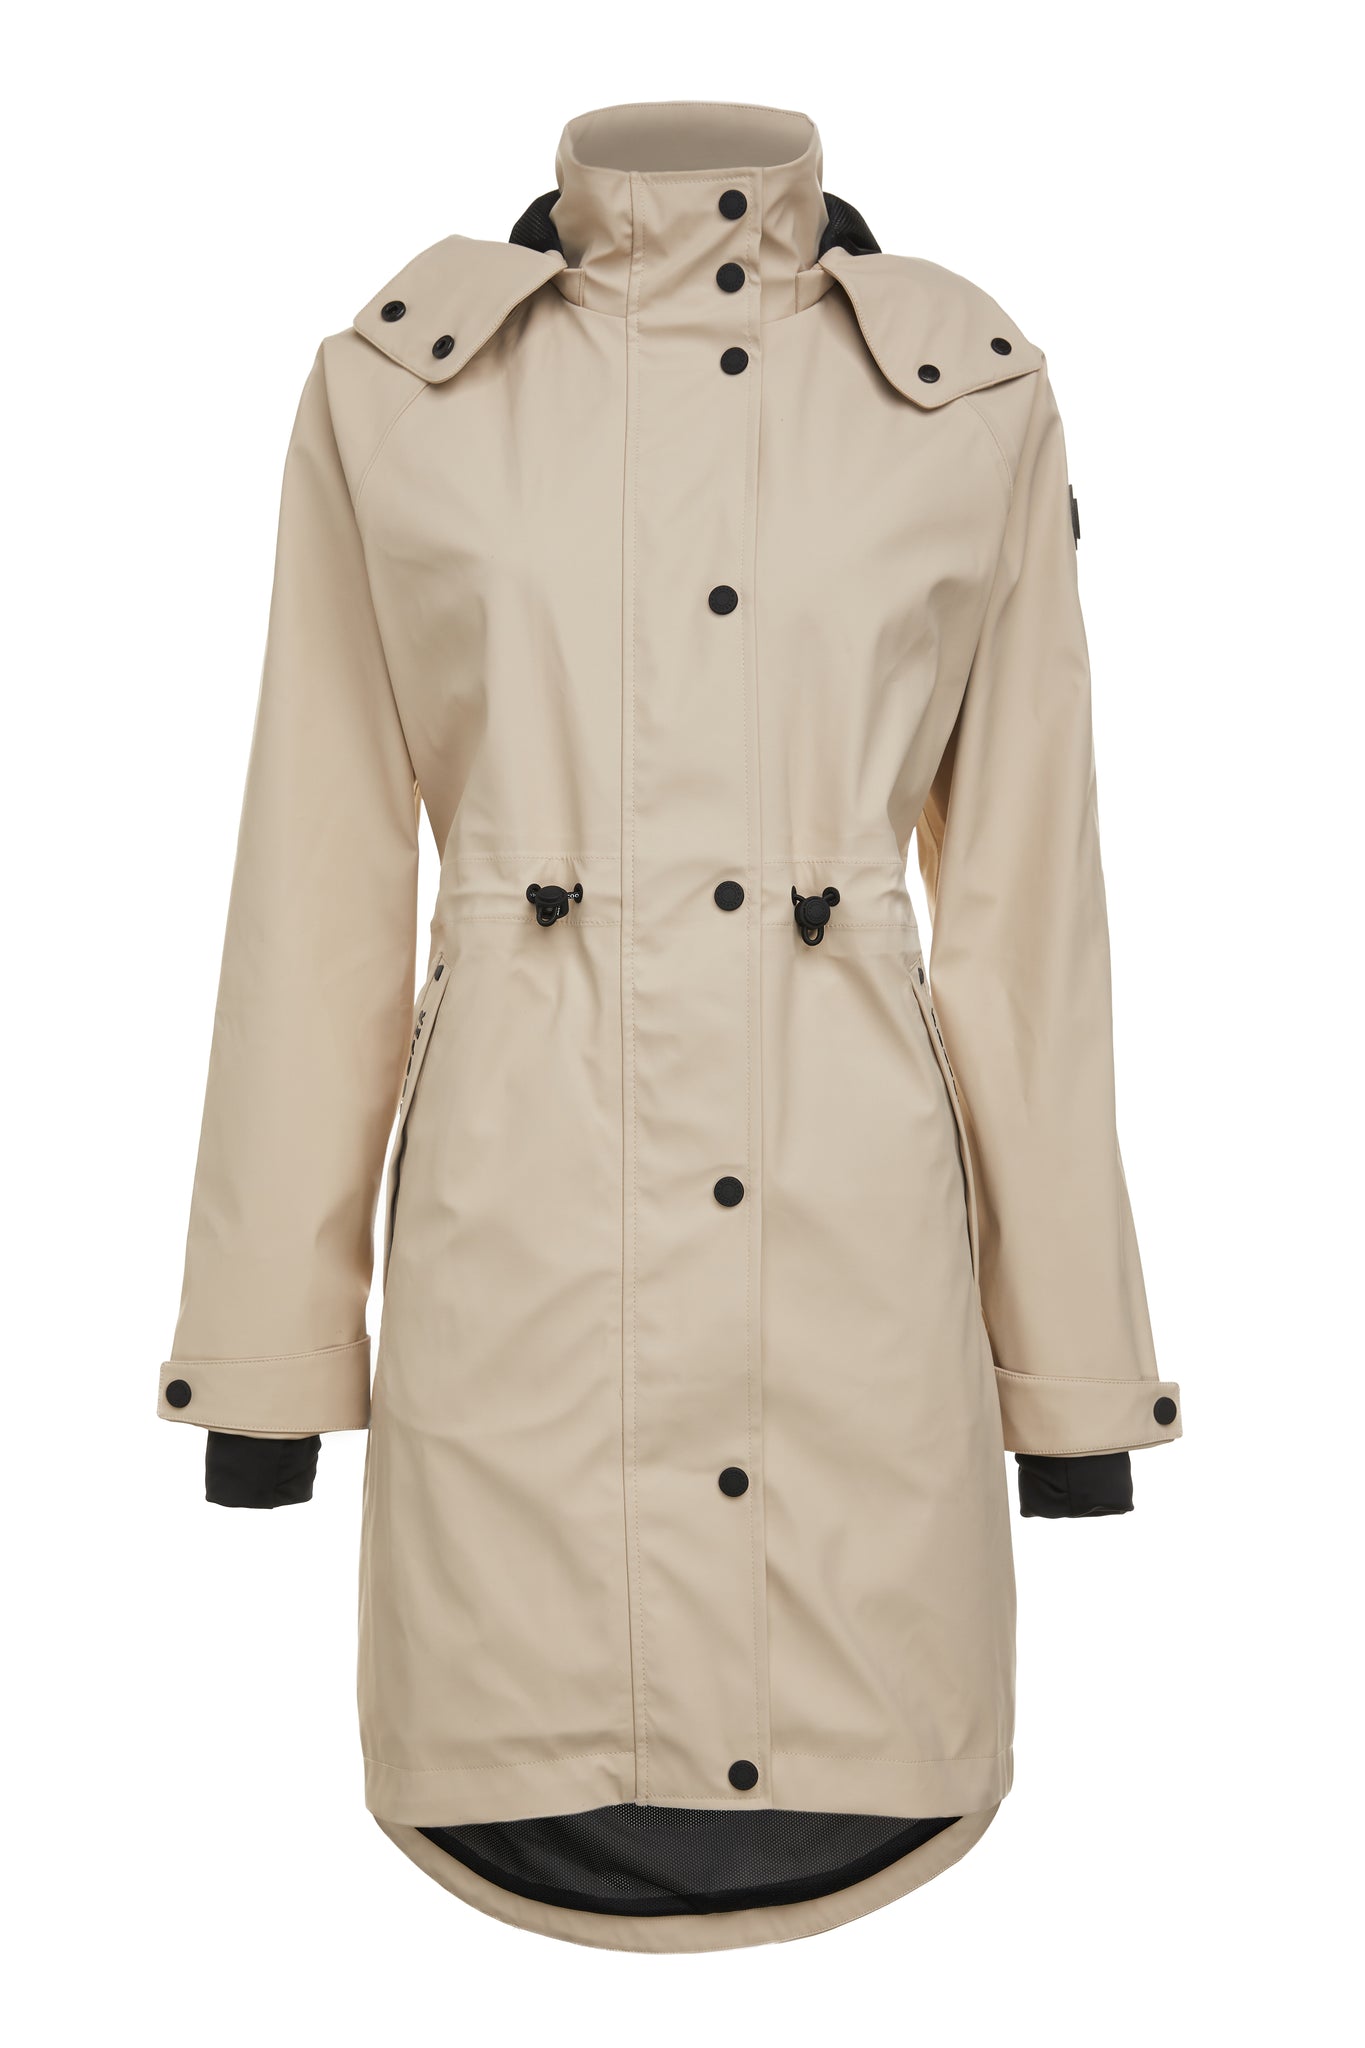 Front image of womens stone rain coat with black details